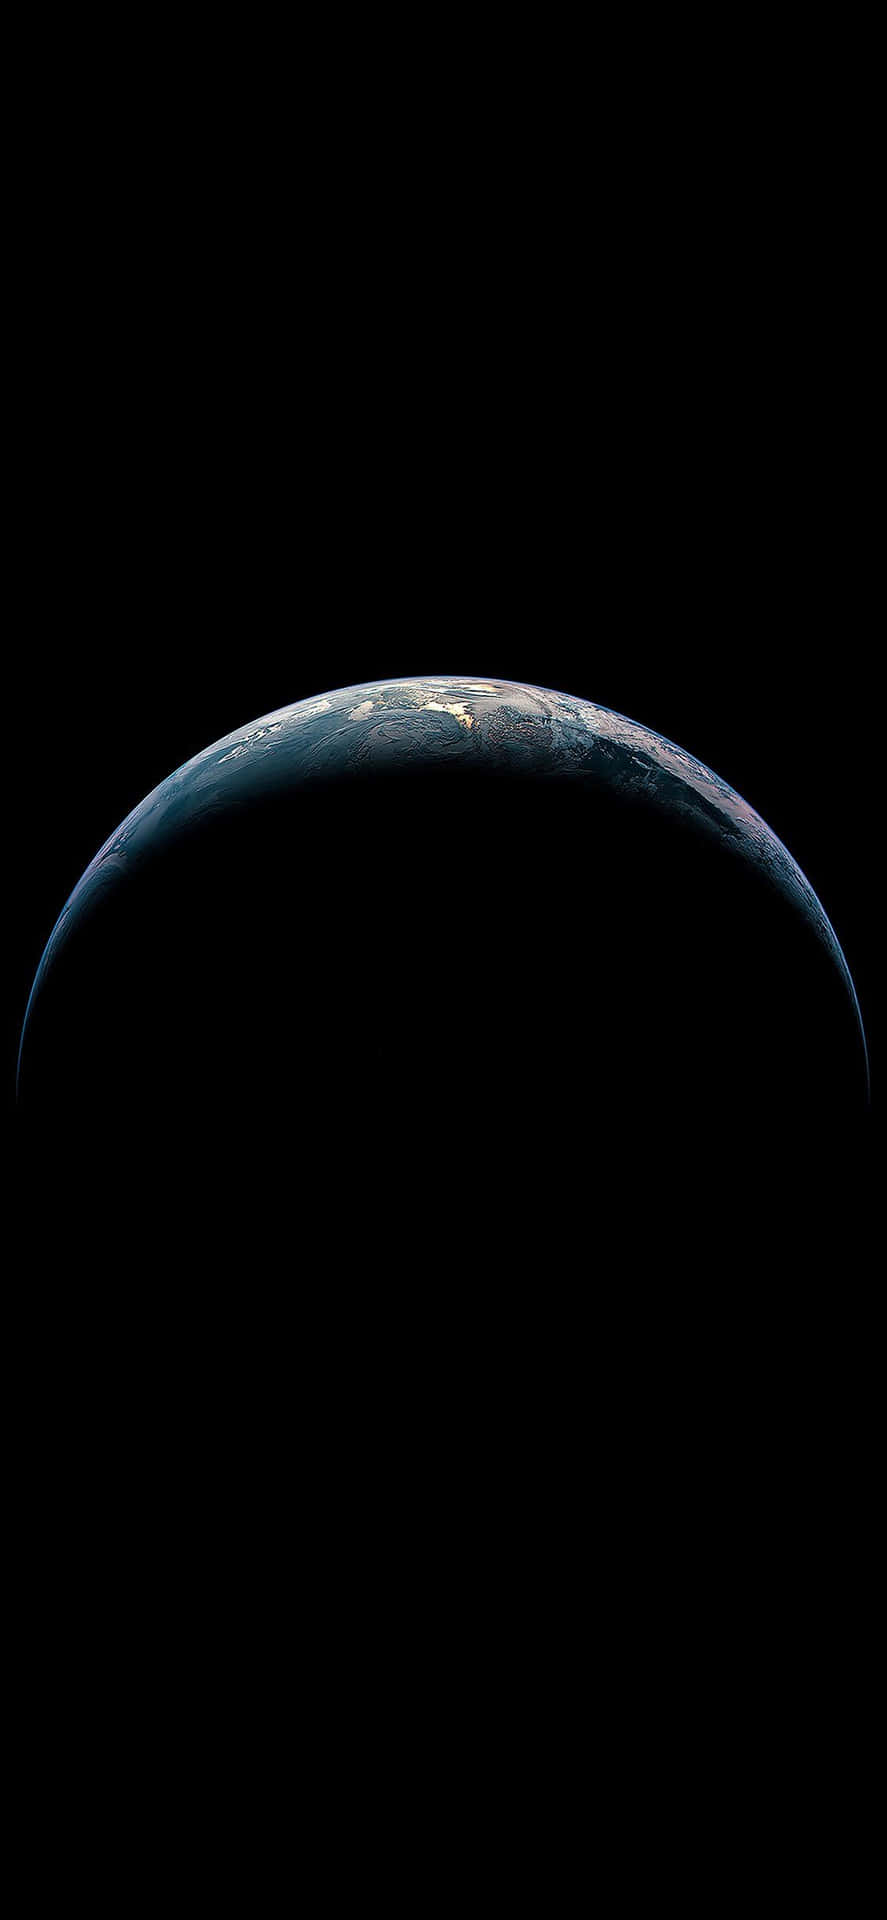 Earth Wallpaper for iPhone 6 Plus